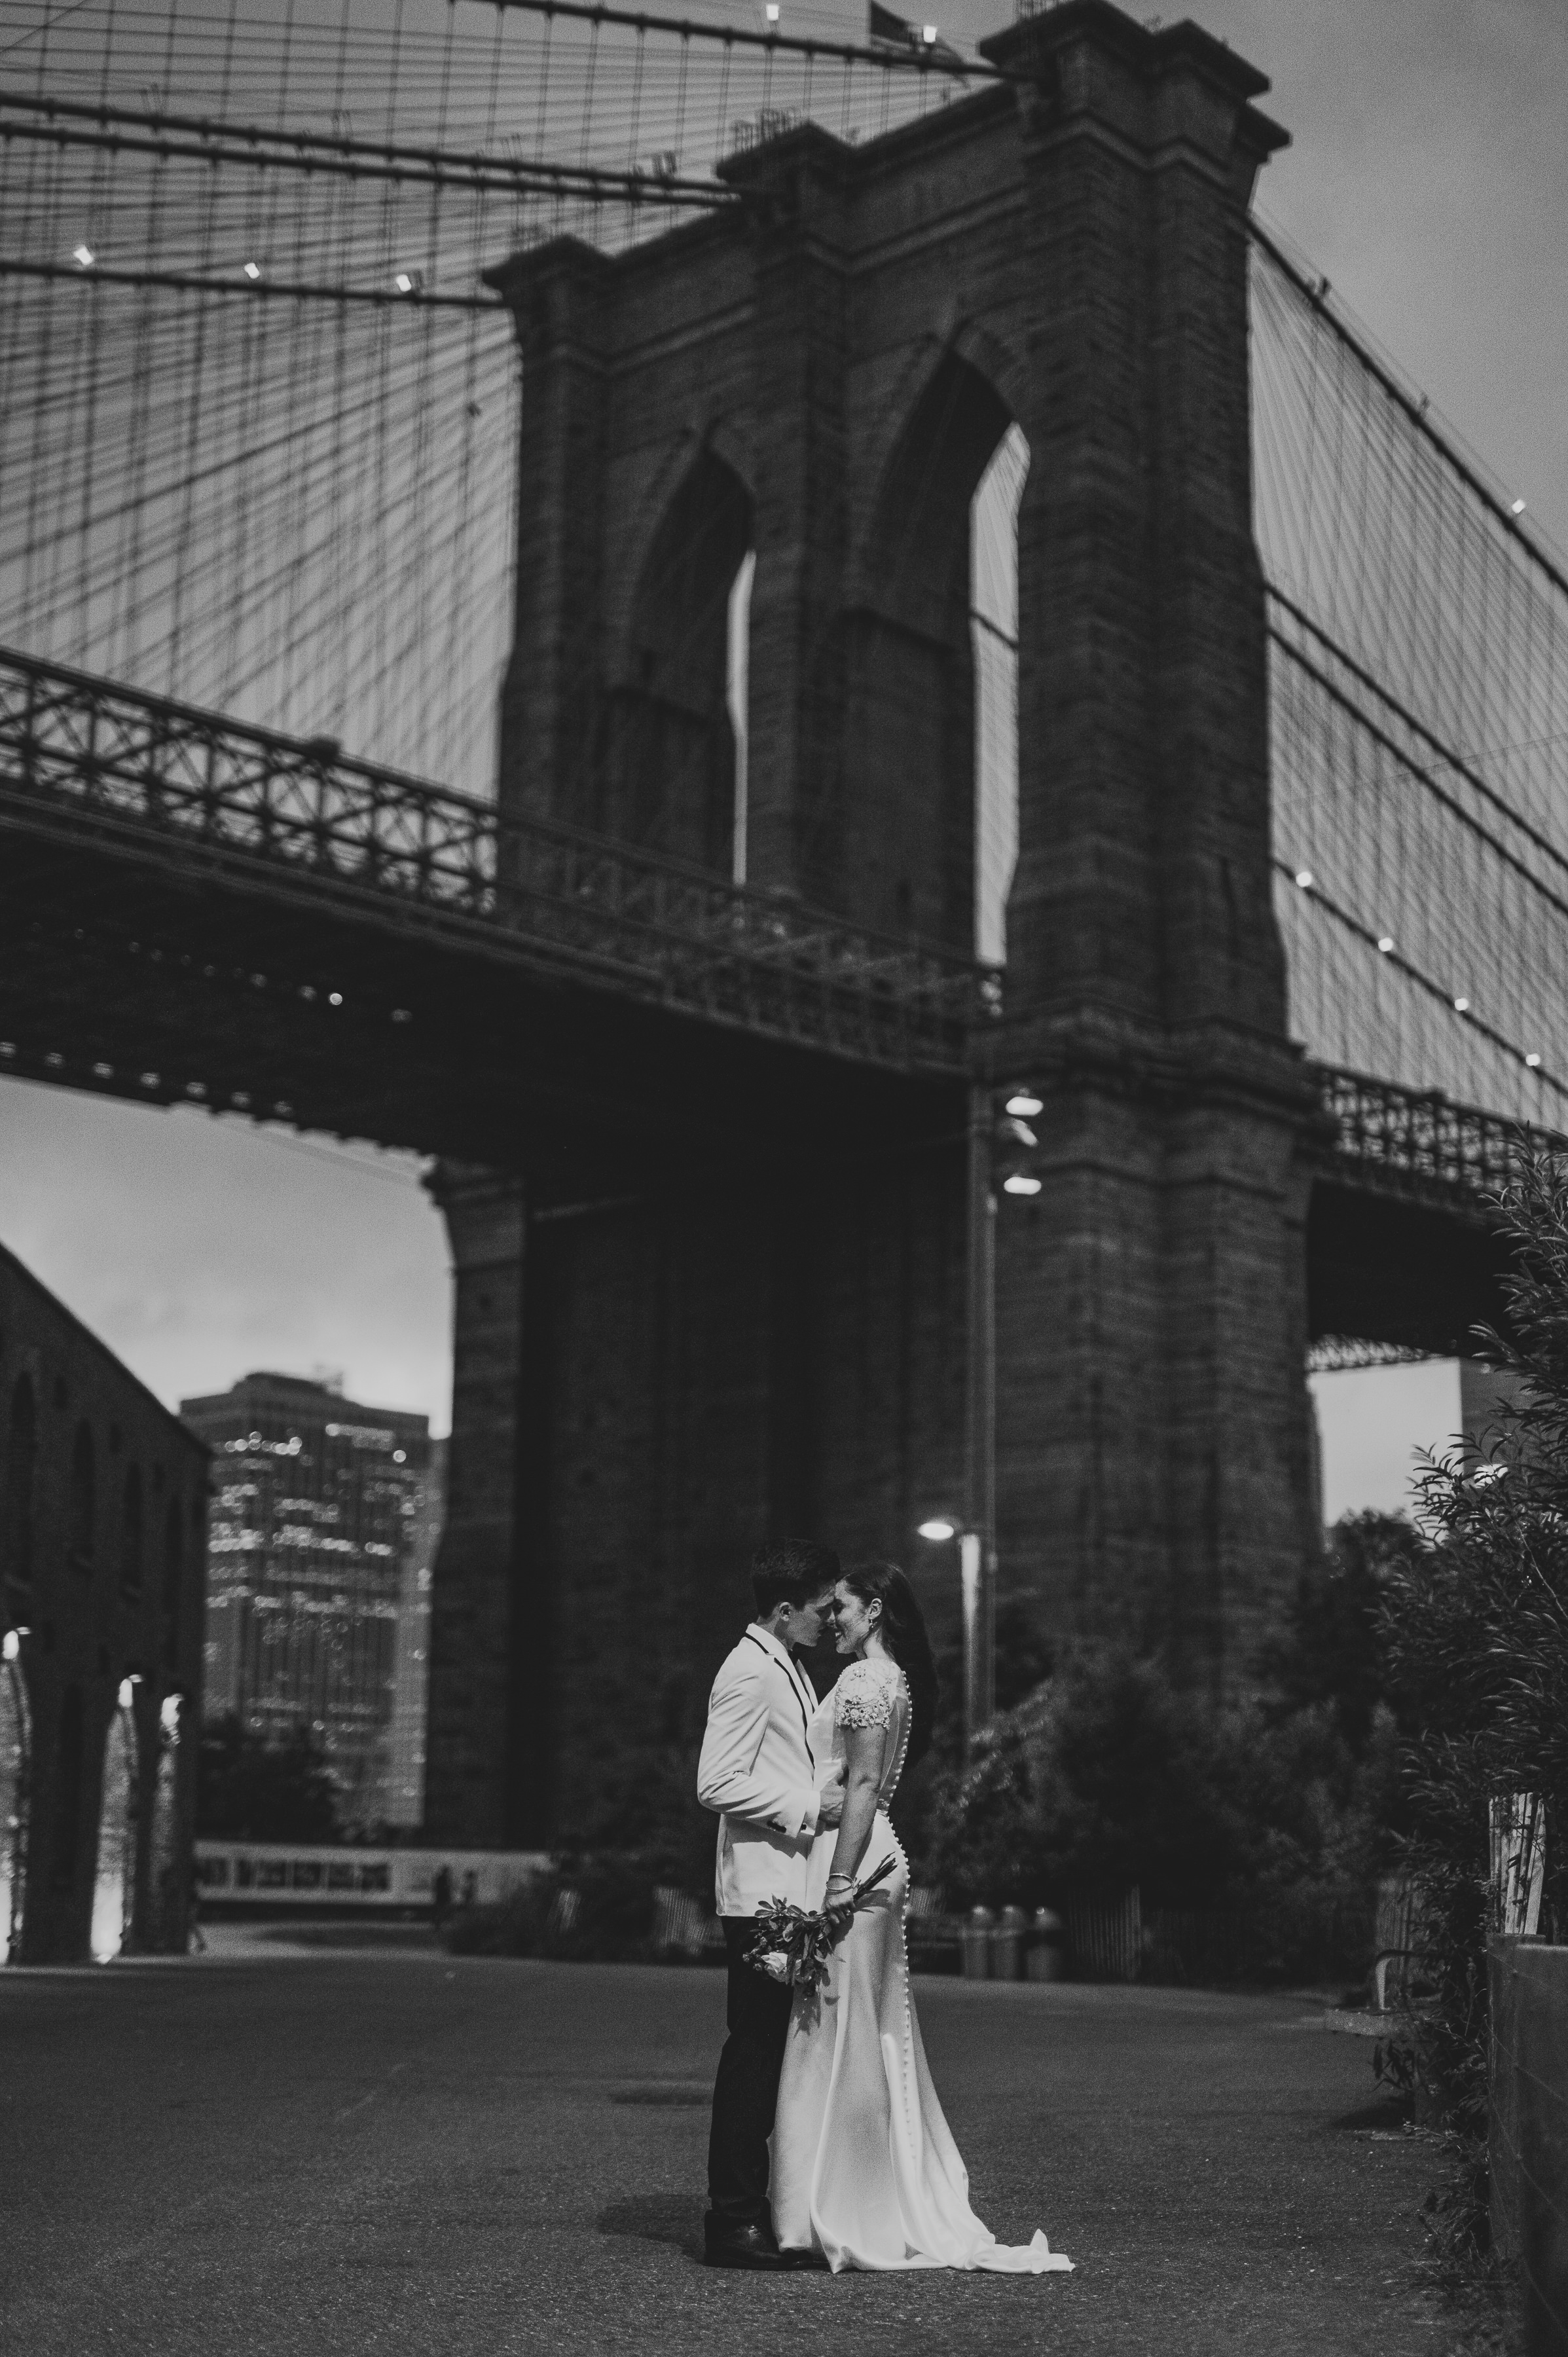 Cinematic portrait of the bride and groom underneath a lamppost in DUMBO